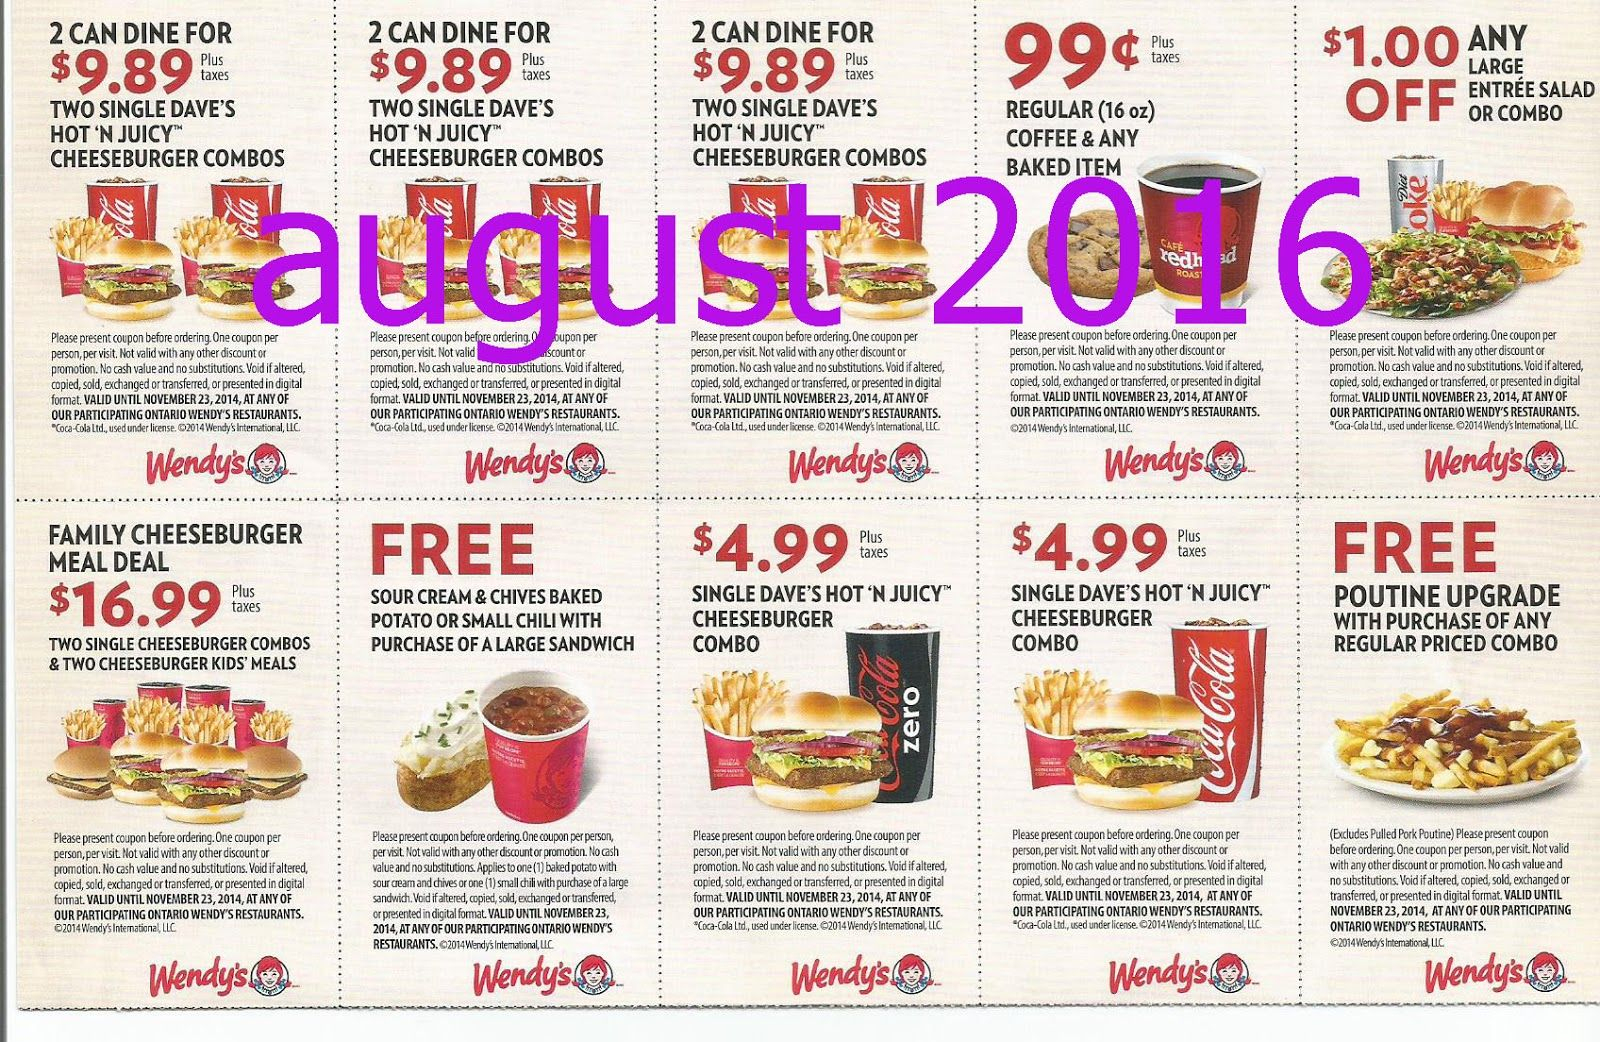 Free Printable Coupons: Wendys Coupons | Fast Food Coupons - Free Printable Coupons 2014